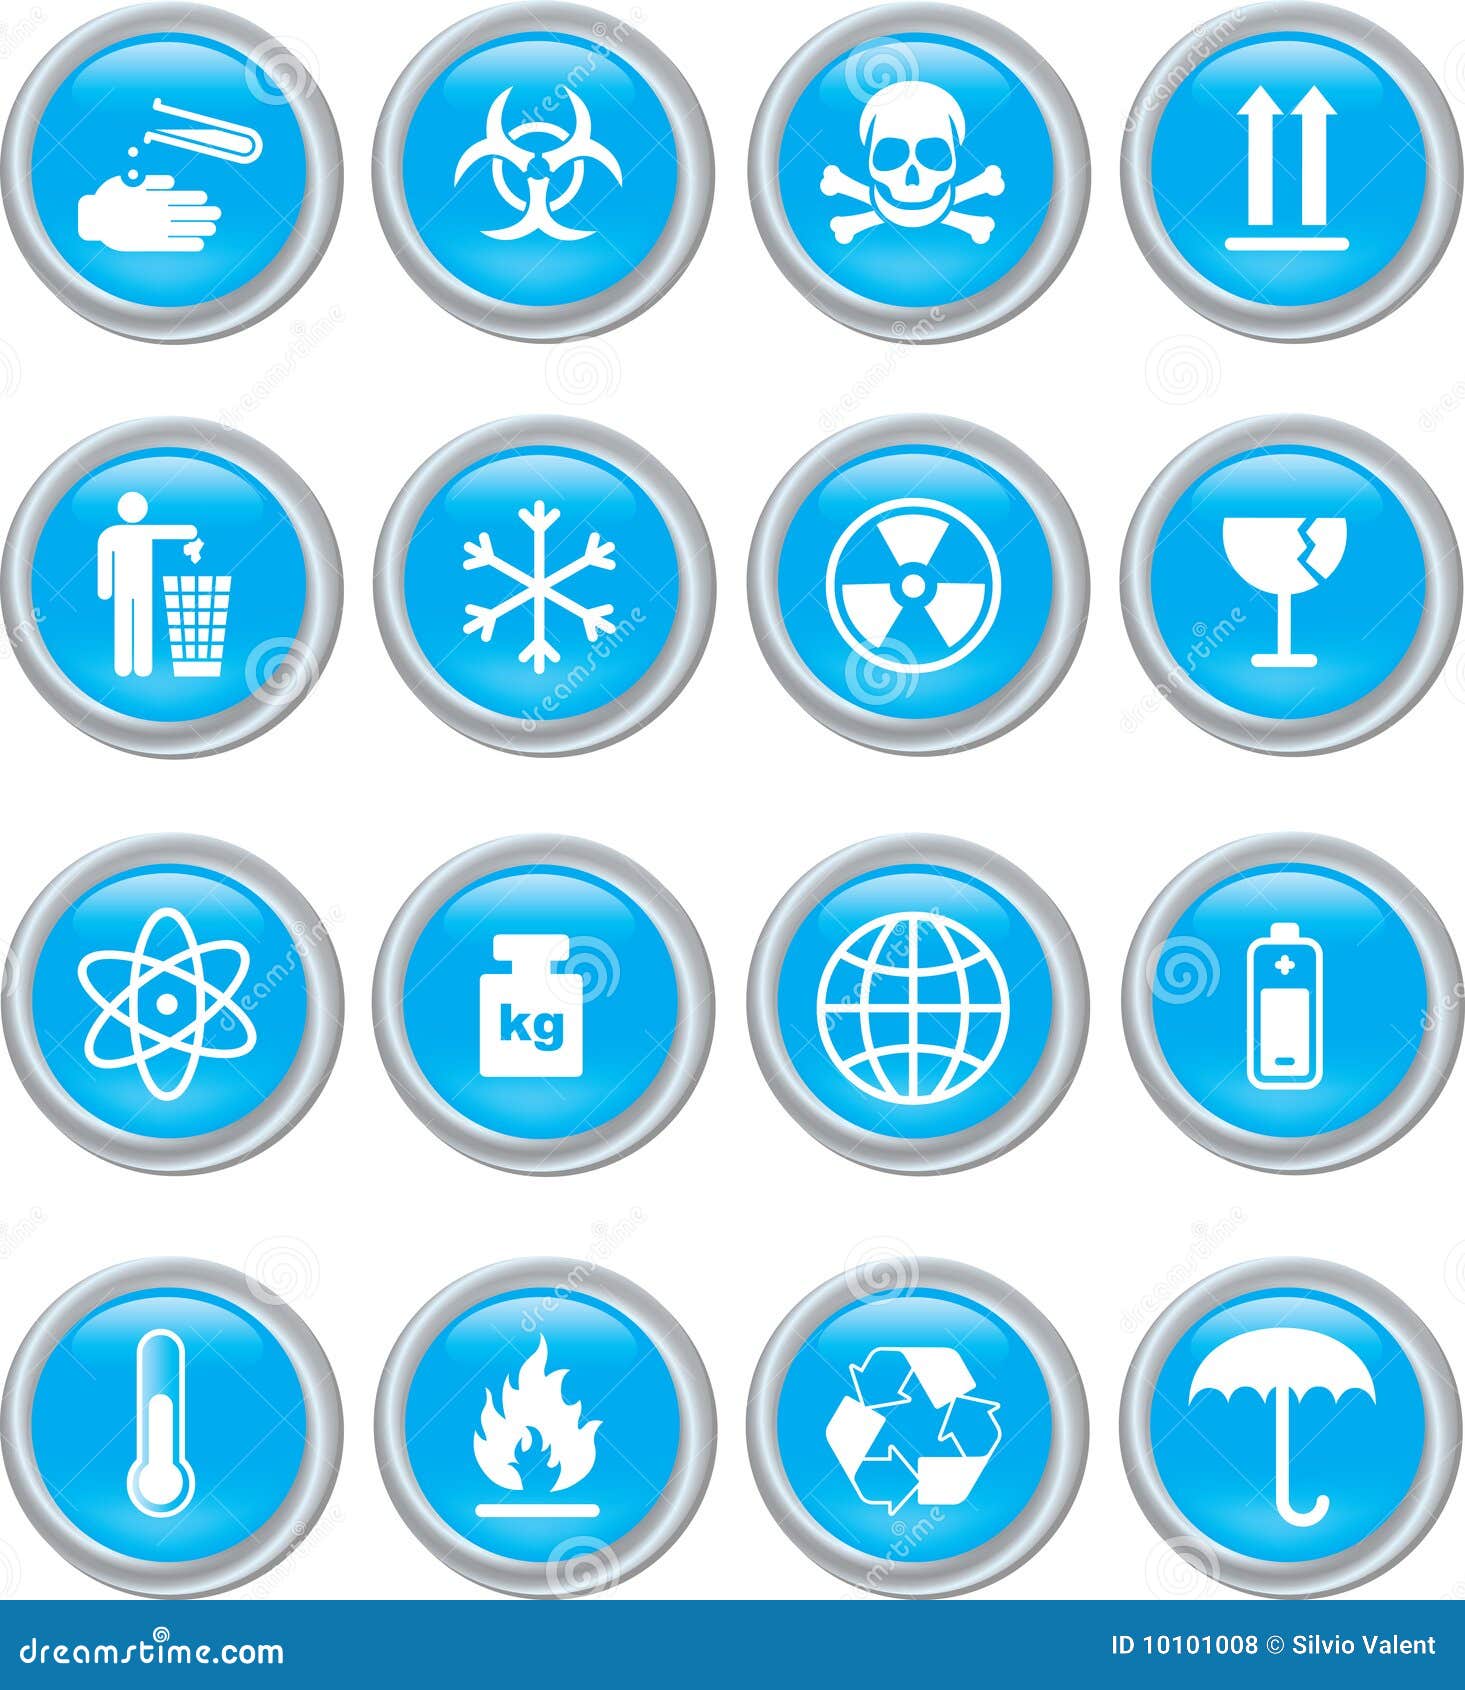 Set of blue icons stock vector. Illustration of chemicals - 10101008